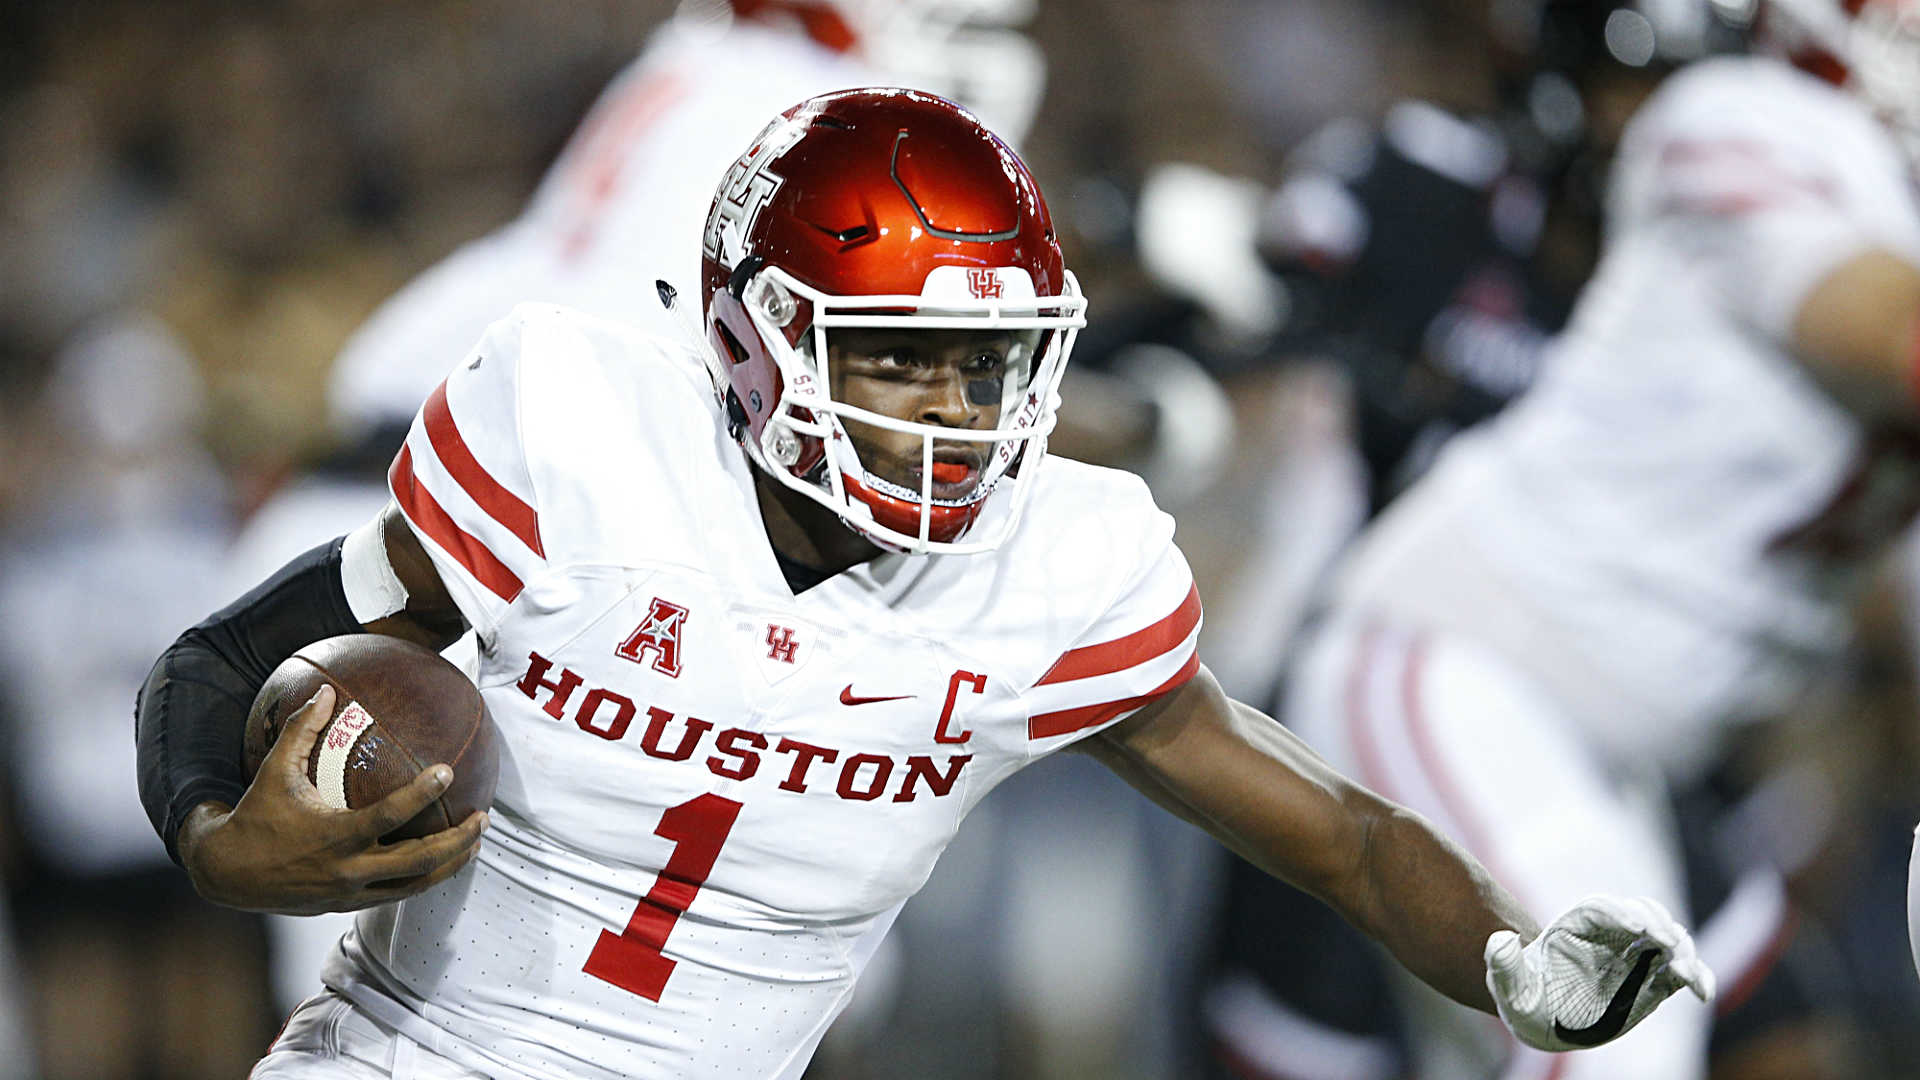 Greg Ward Jr. shows his importance to Houston with big night against